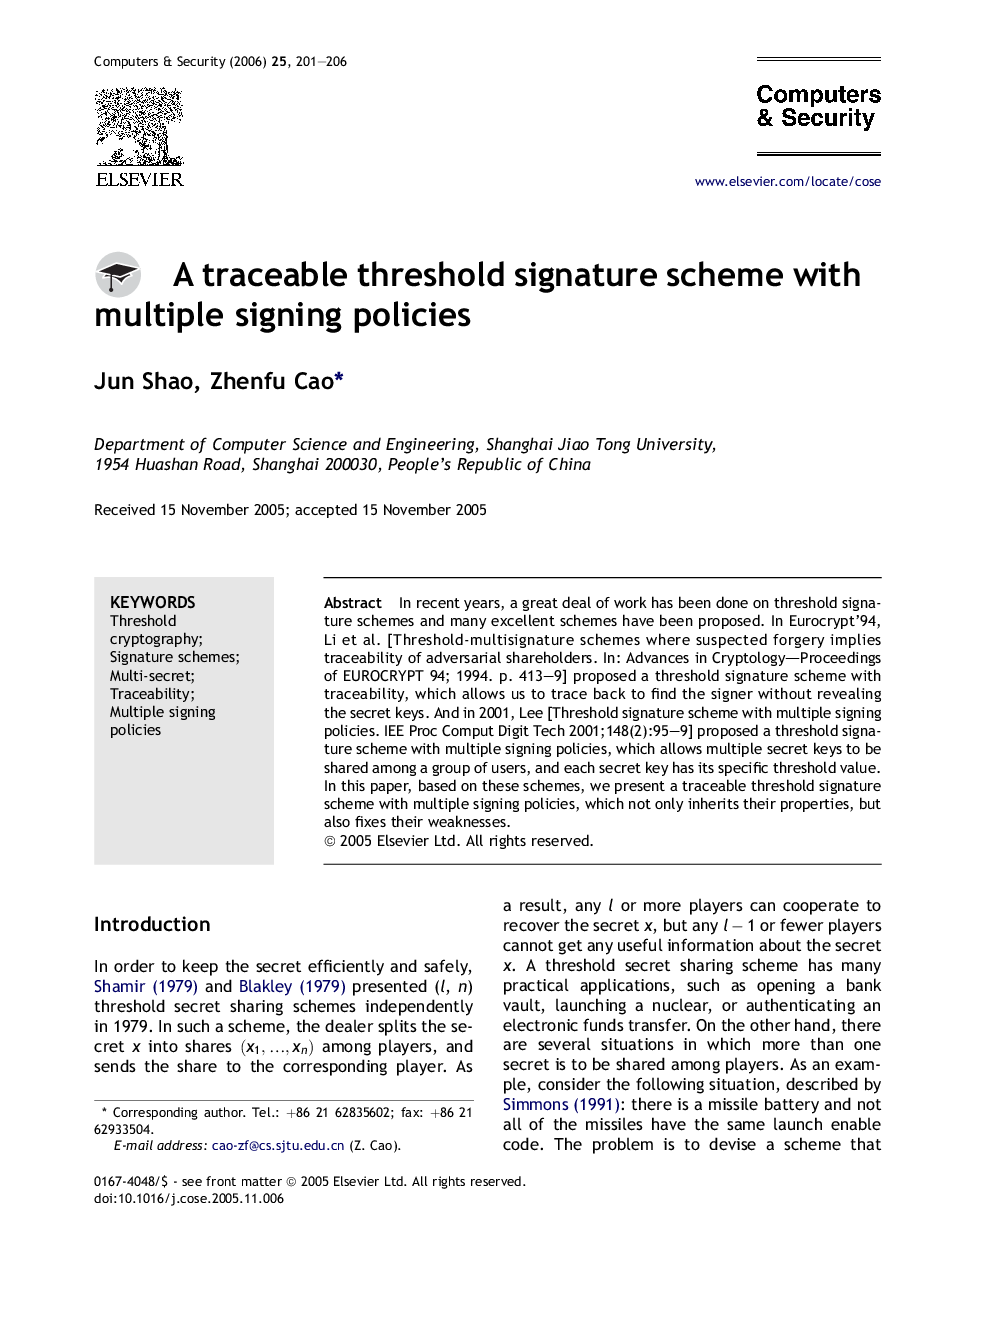 A traceable threshold signature scheme with multiple signing policies